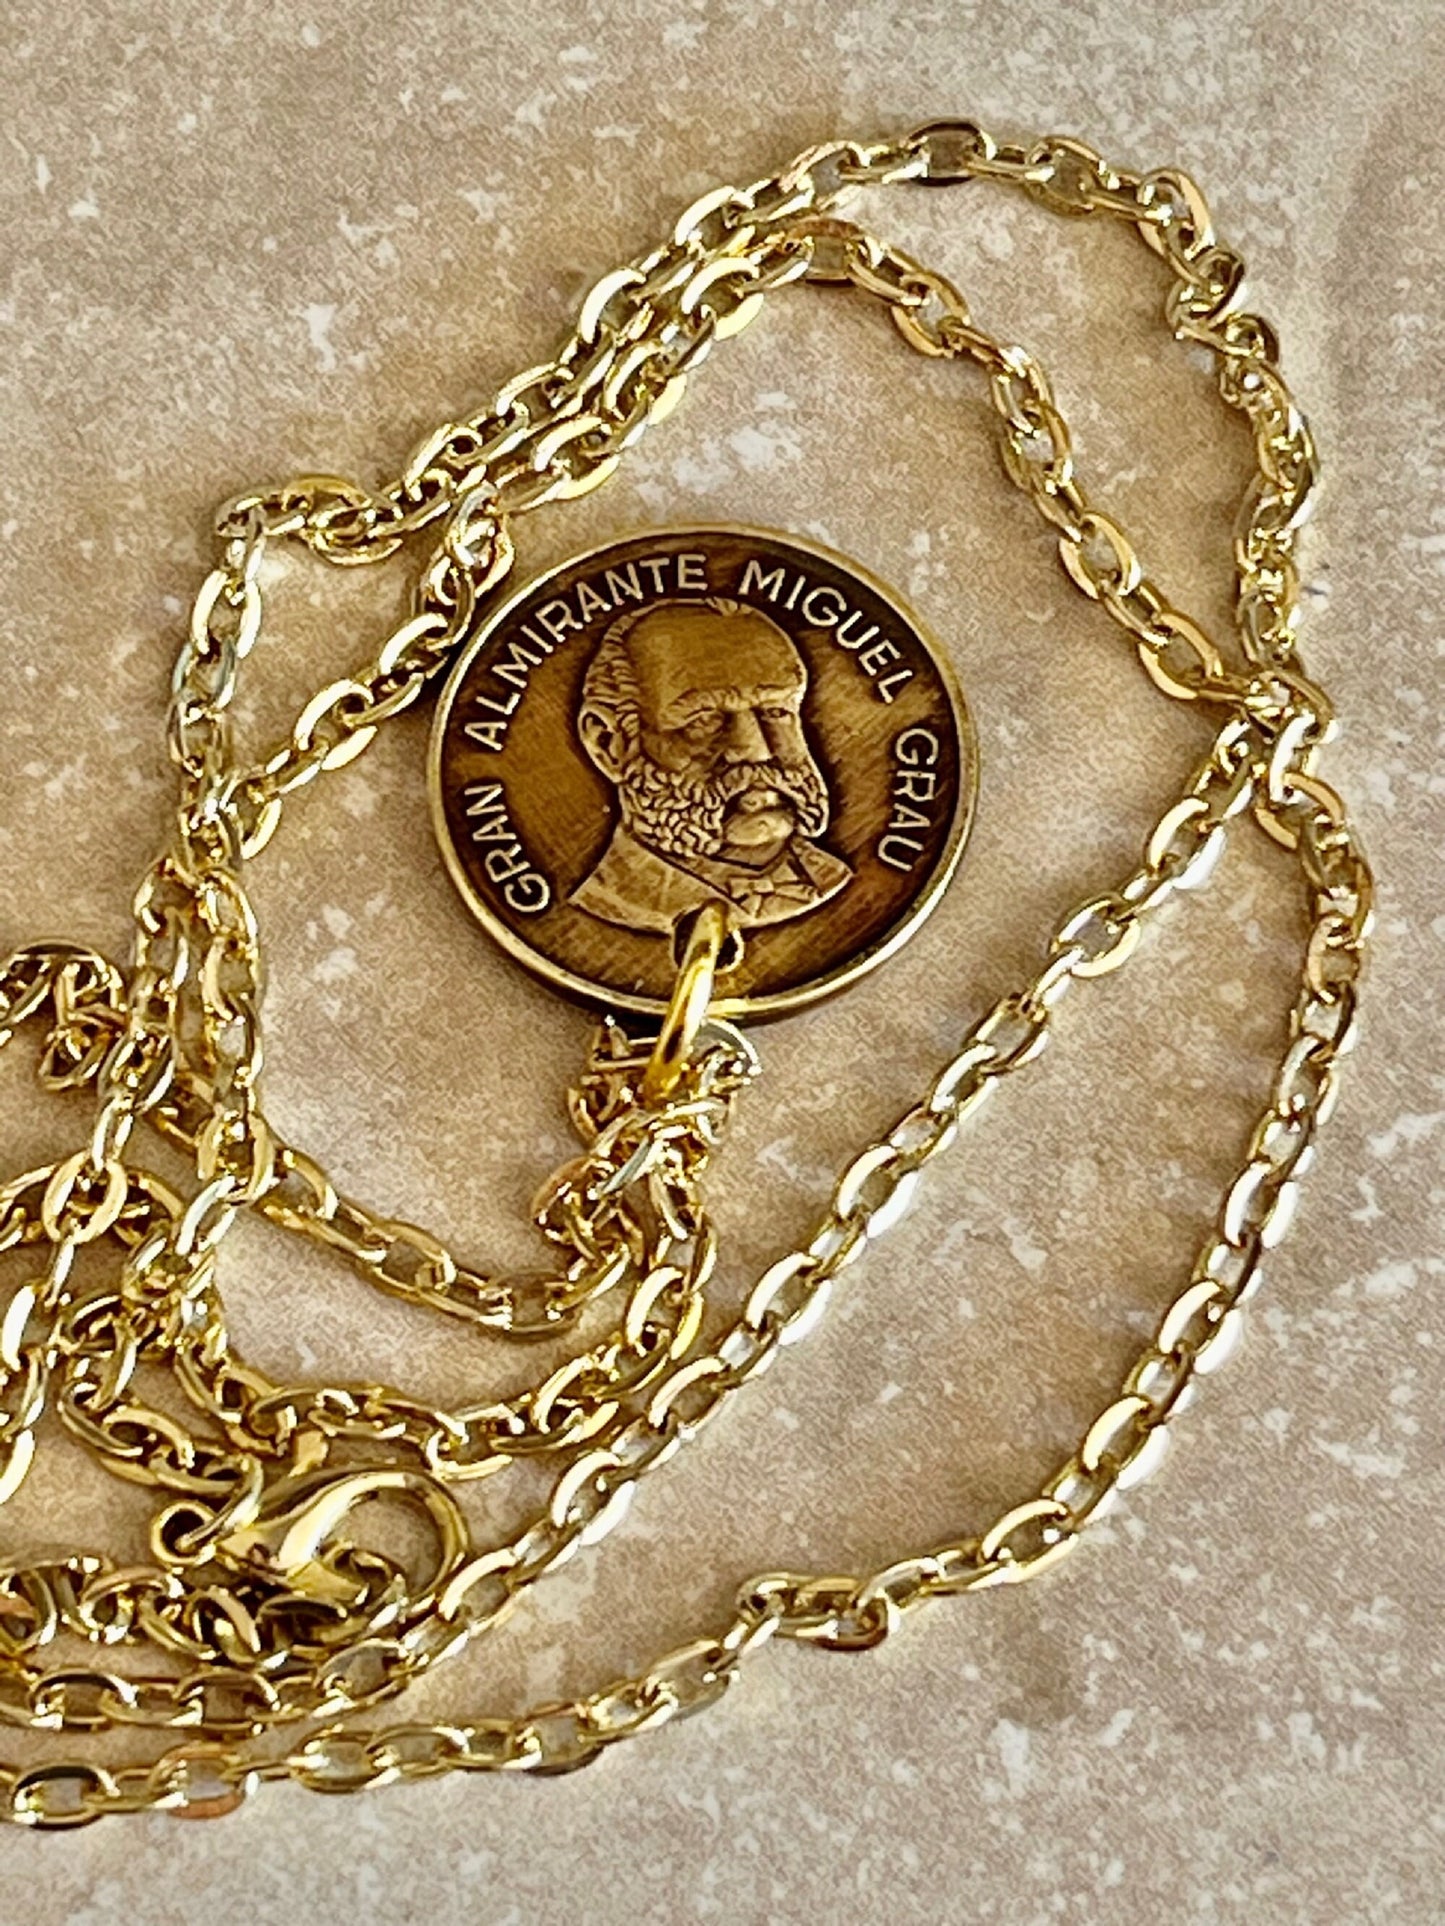 Peru Coin Pendant Peruvian 20 Centimos Personal Necklace Old Vintage Handmade Jewelry Gift Friend Charm For Him Her World Coin Collector